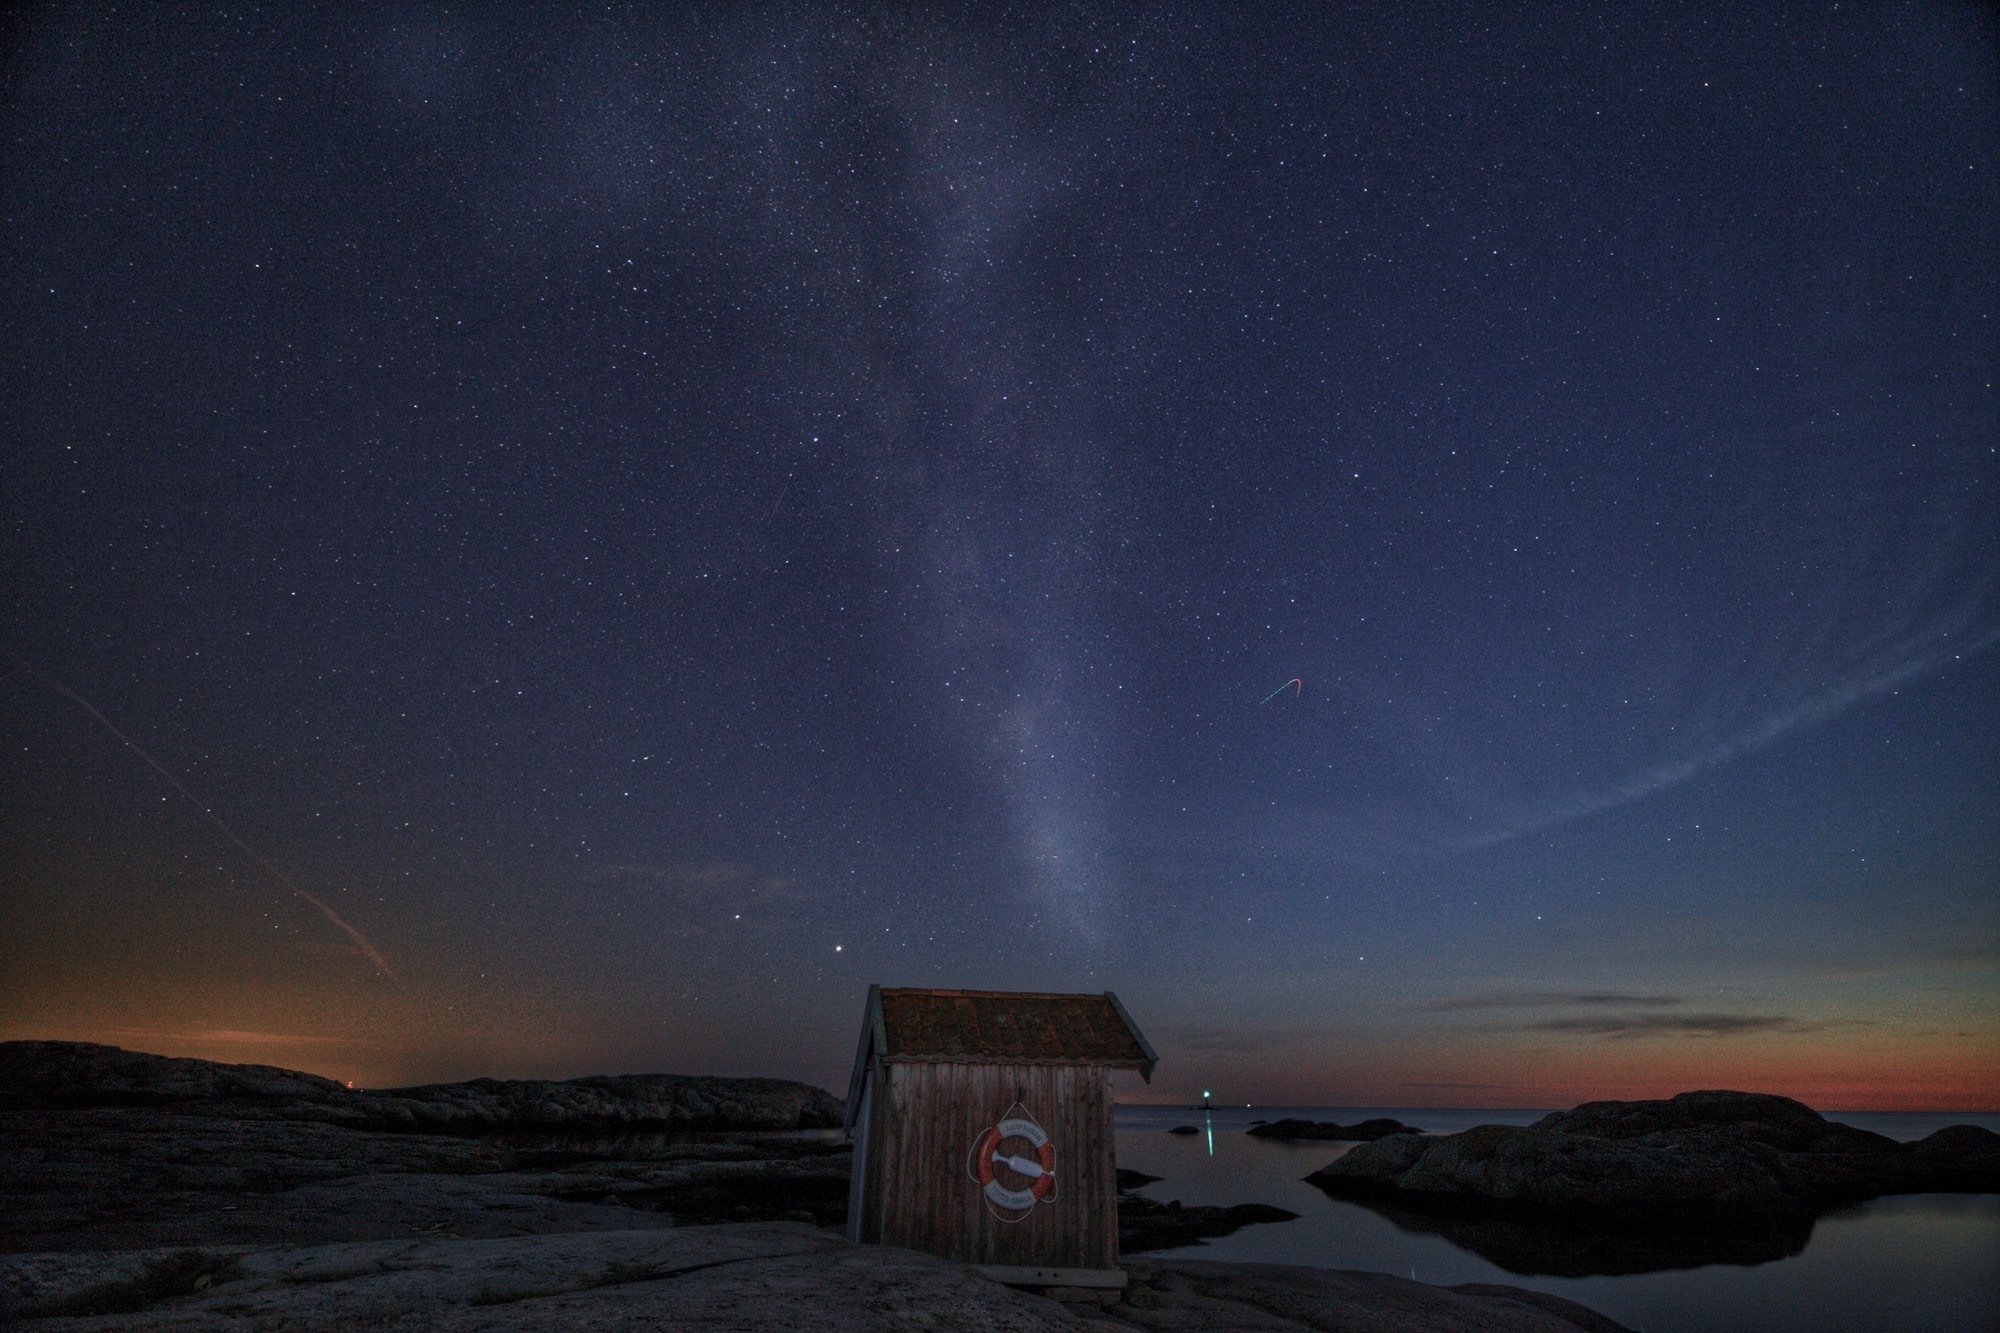 131. The "Enslingens bord" with the Milky Way